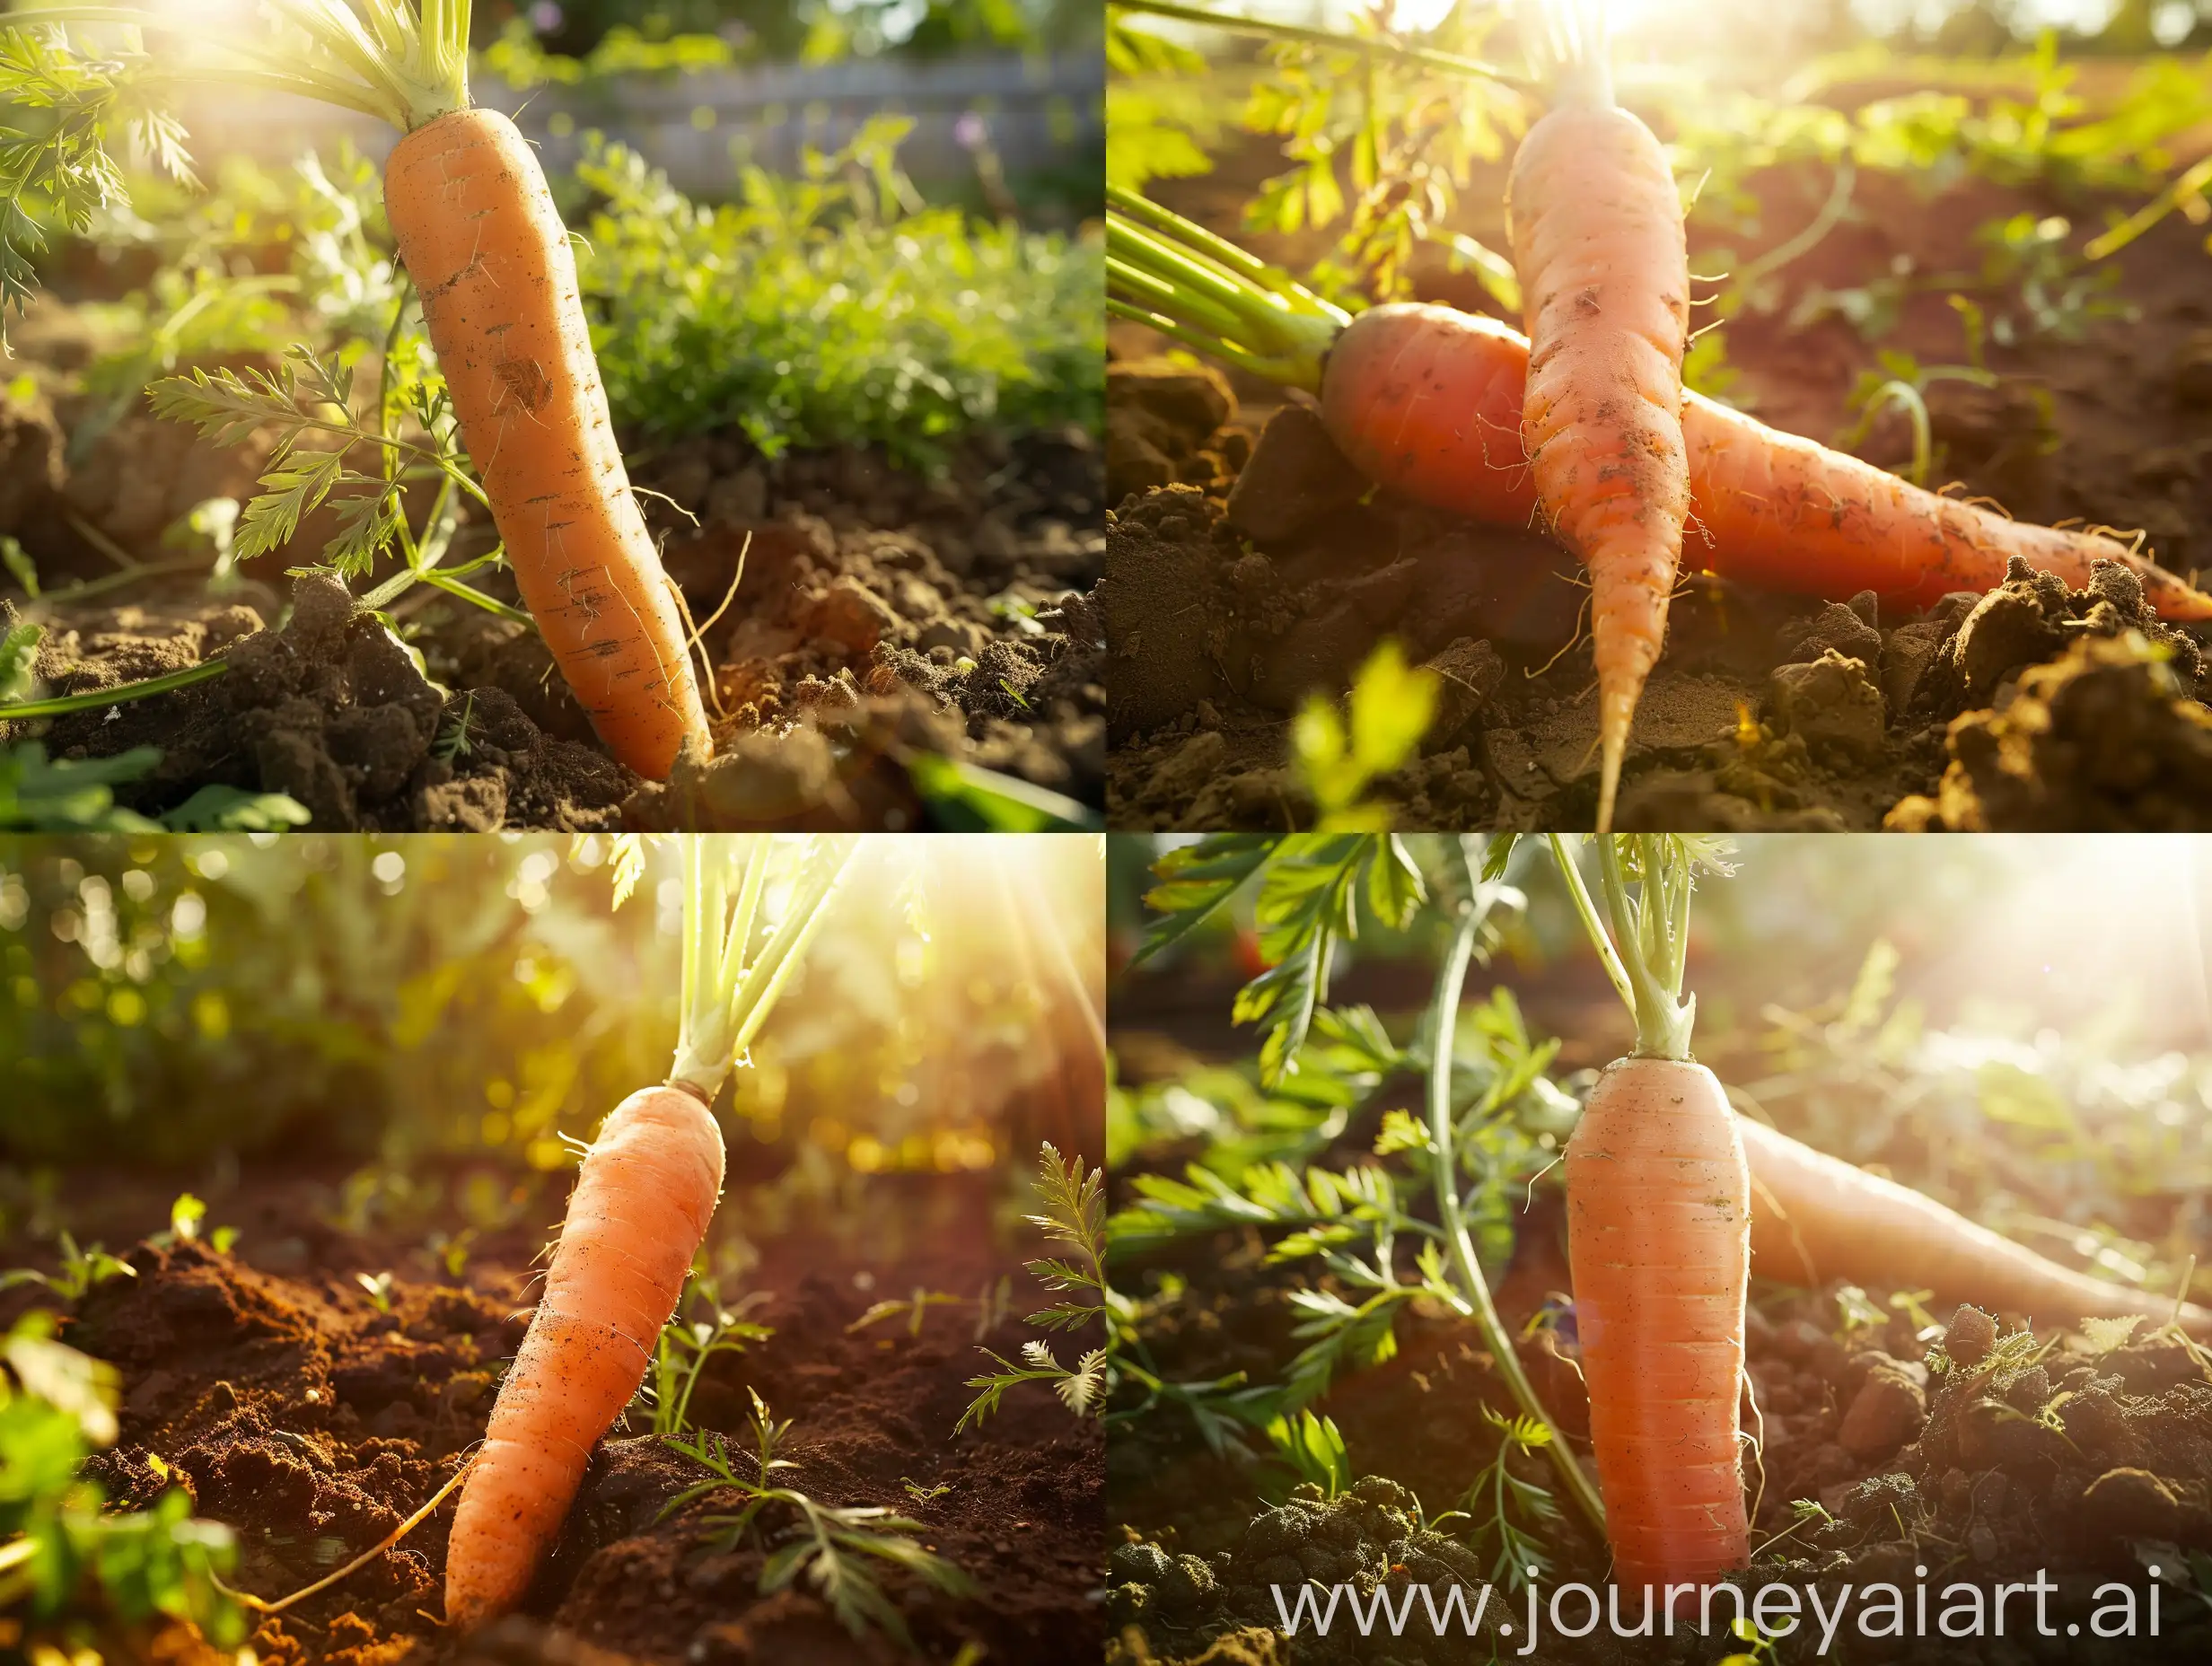 Close up high detailed photo capturing a Carrot, Nantes Half Long. The sun, casting a warm, golden glow, bathes the scene in a serene ambiance, illuminating the intricate details of each element. The composition centers on a Carrot, Nantes Half Long. Mid-19th century variety is easy to grow, slim, cylindrical, orange roots are 7" long, 1½" thick, require no peeling, and are packed with vitamins. A favorite variety thanks to its productivity, delicious flavor, and wide adaptability. Garden Hint: For a. The image evokes a sense of tranquility and natural beauty, inviting viewers to immerse themselves in the splendor of the landscape. --ar 16:9 